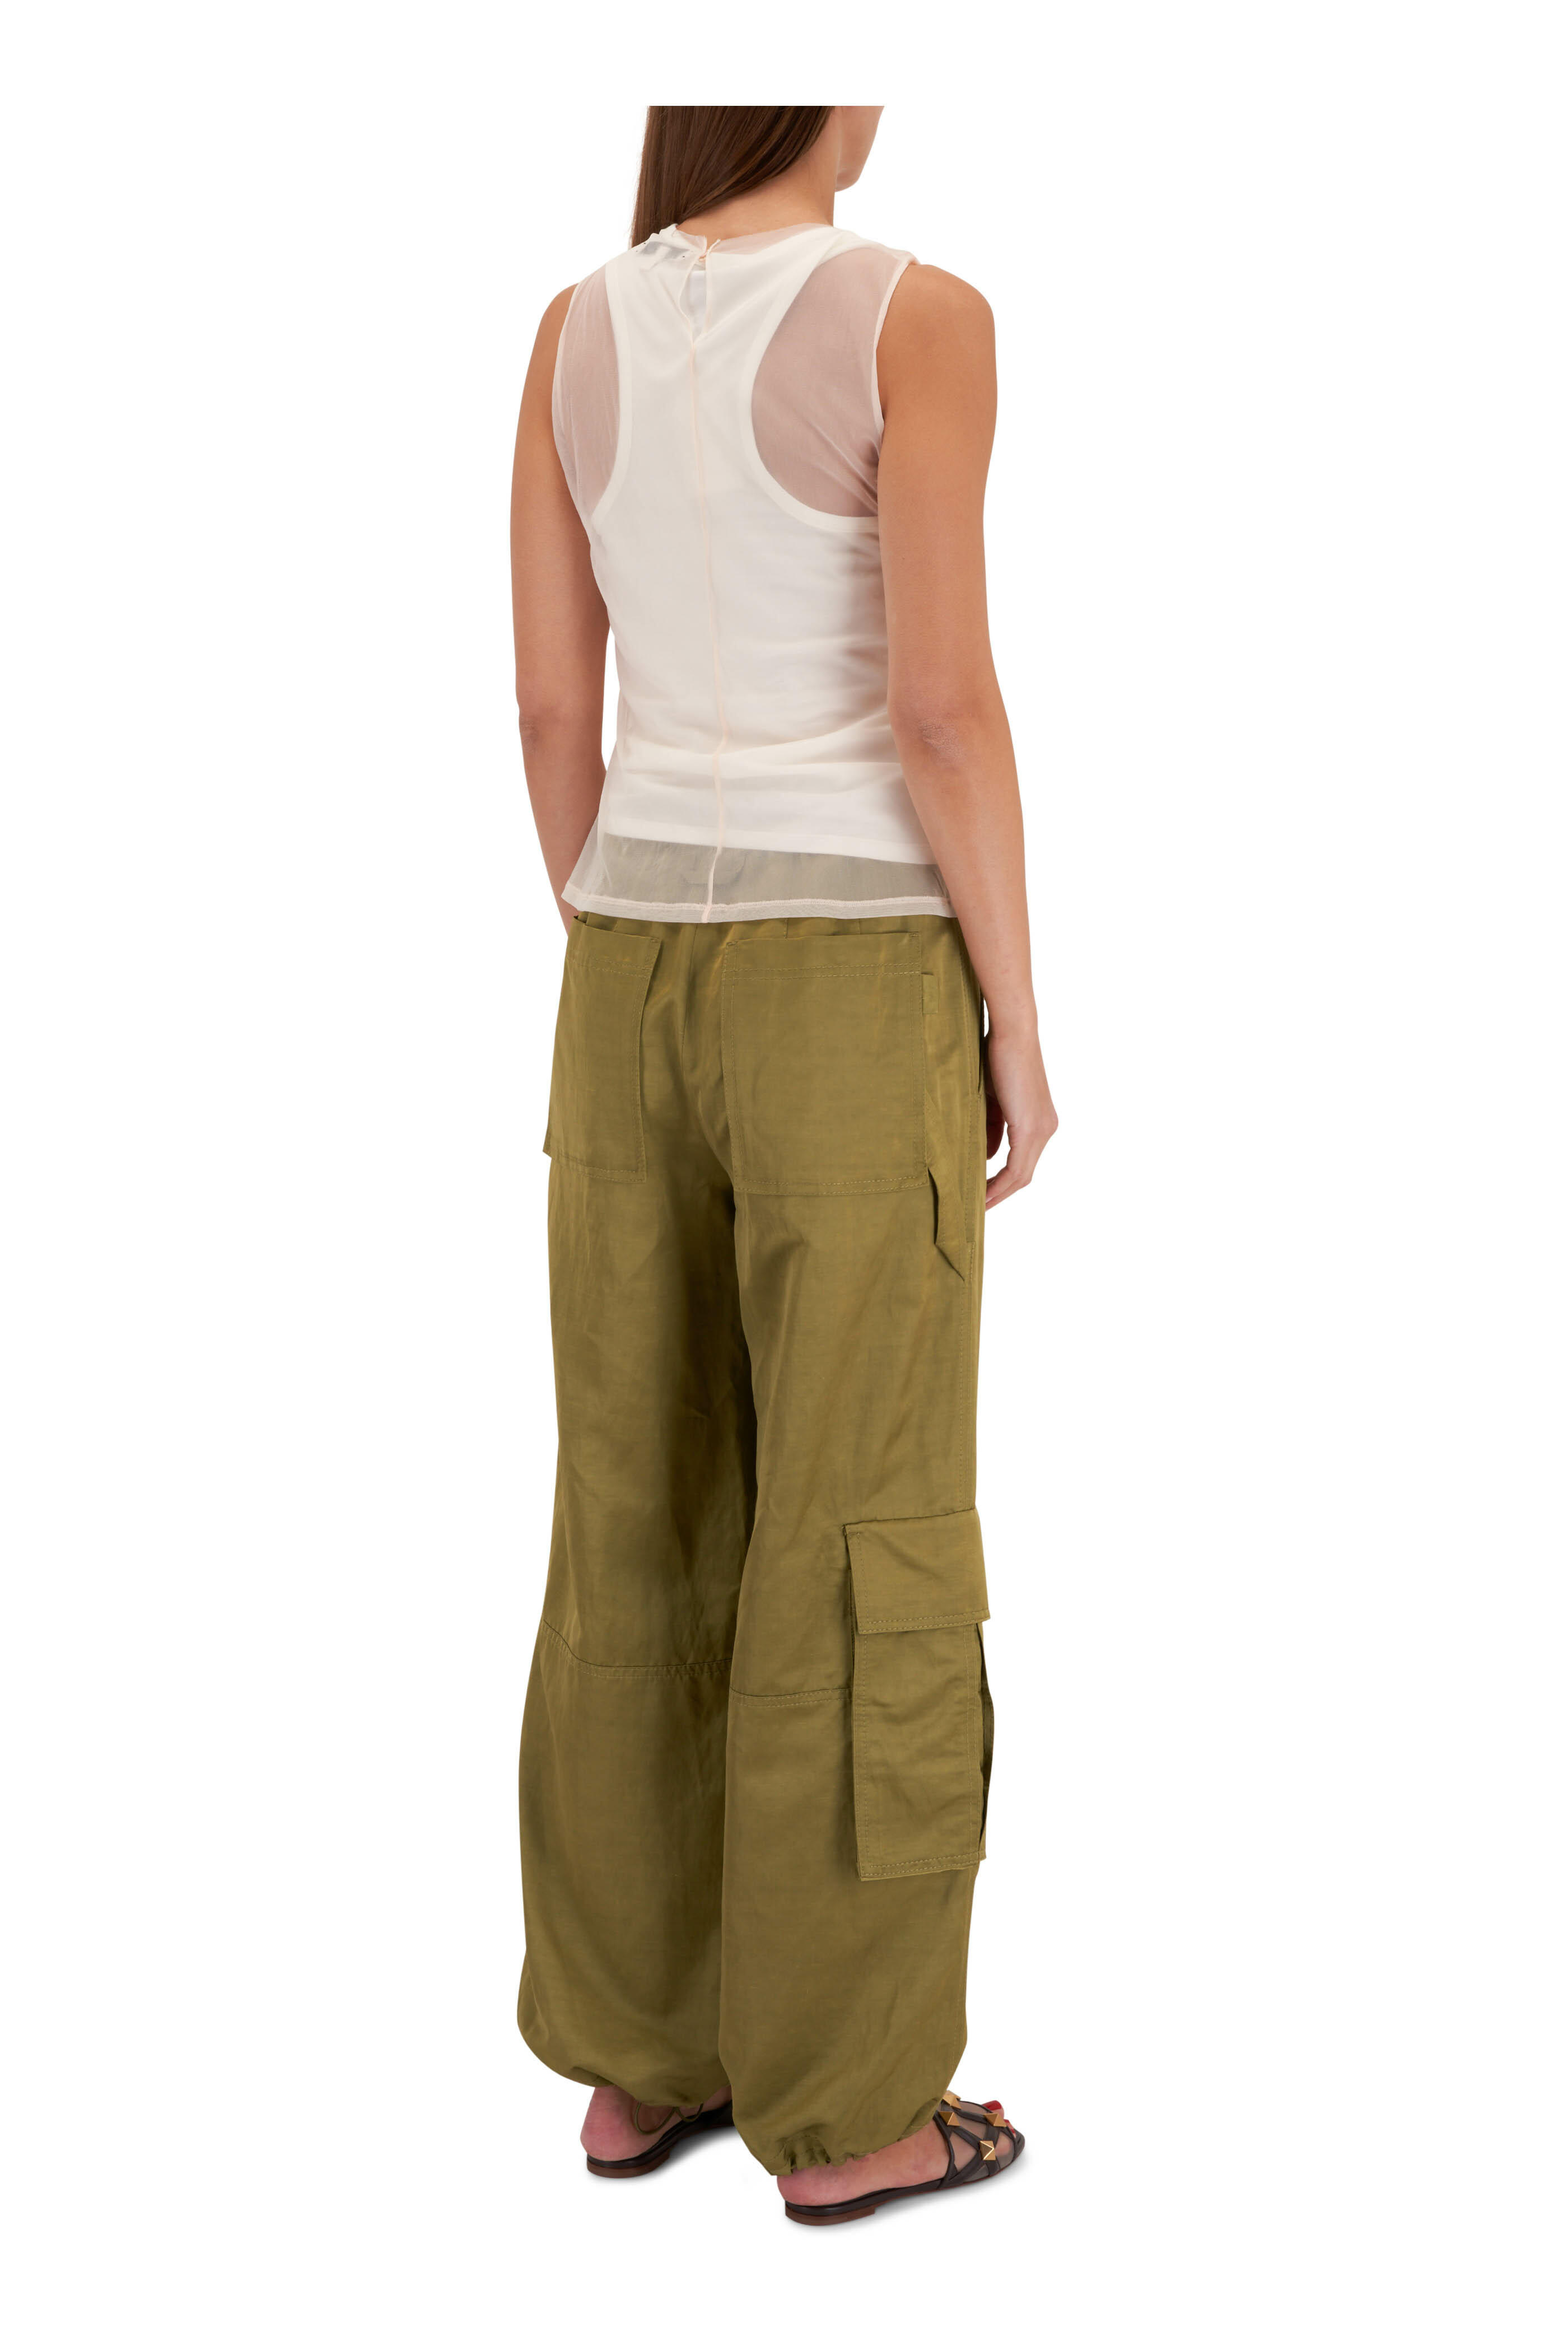 Dorothee Schumacher - Slouchy Coolness Olive Green Cargo Pant